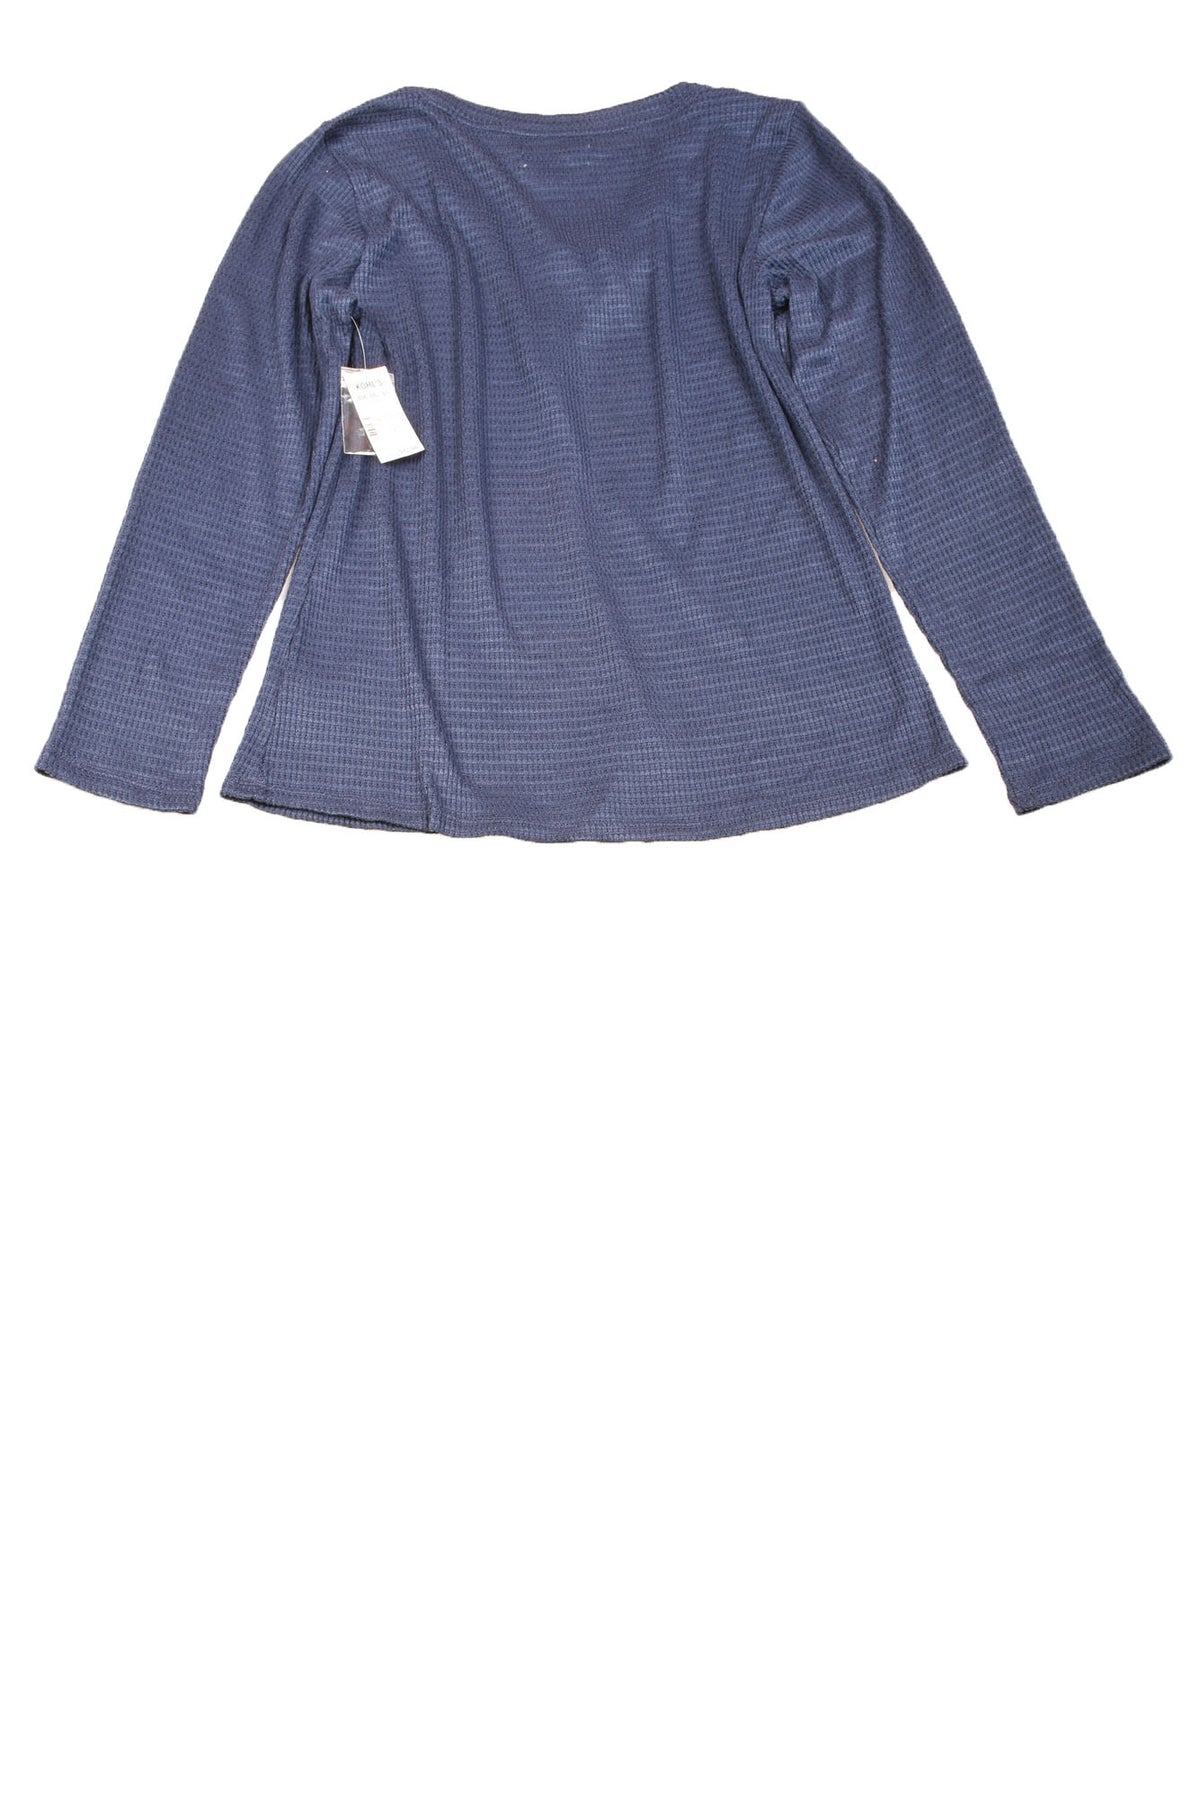 Women&#39;s Top By Sonoma